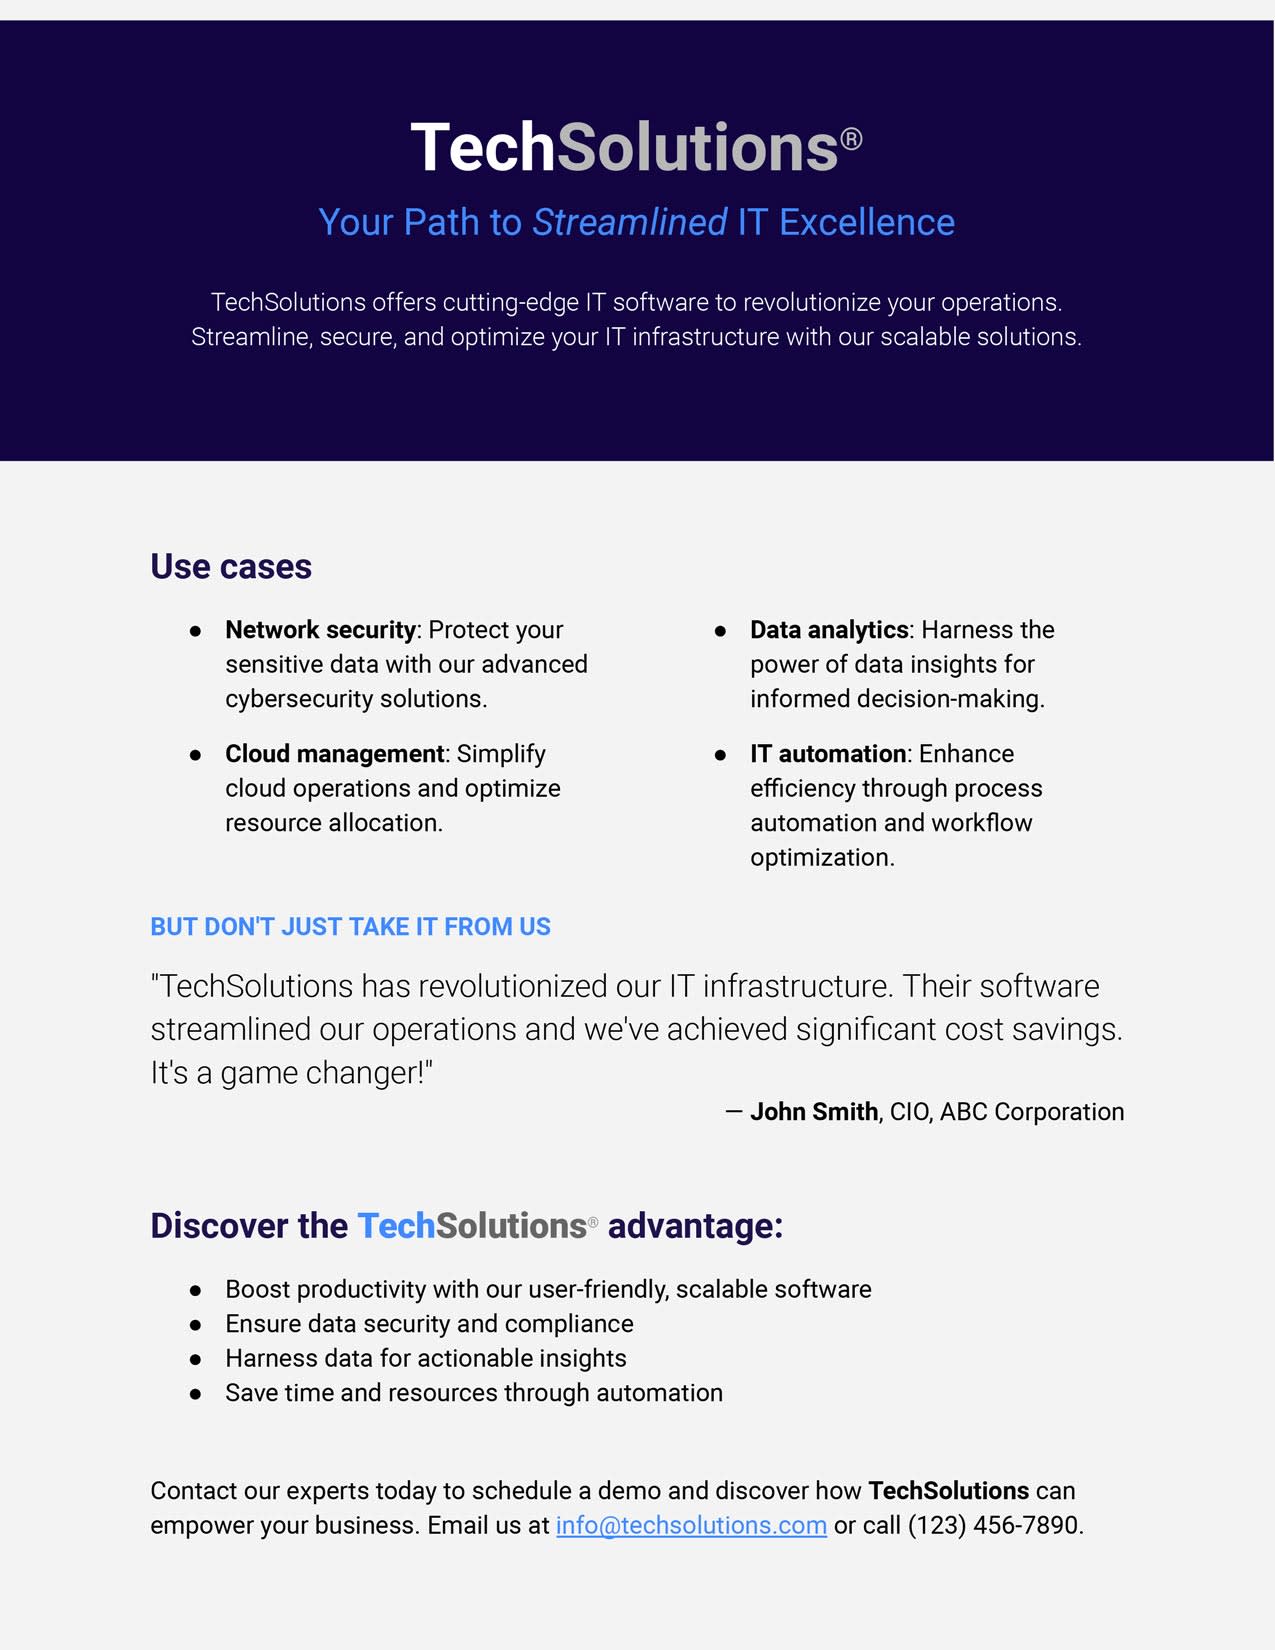 Example of a B2B one-pager including use cases, customer testimonials and value propositions